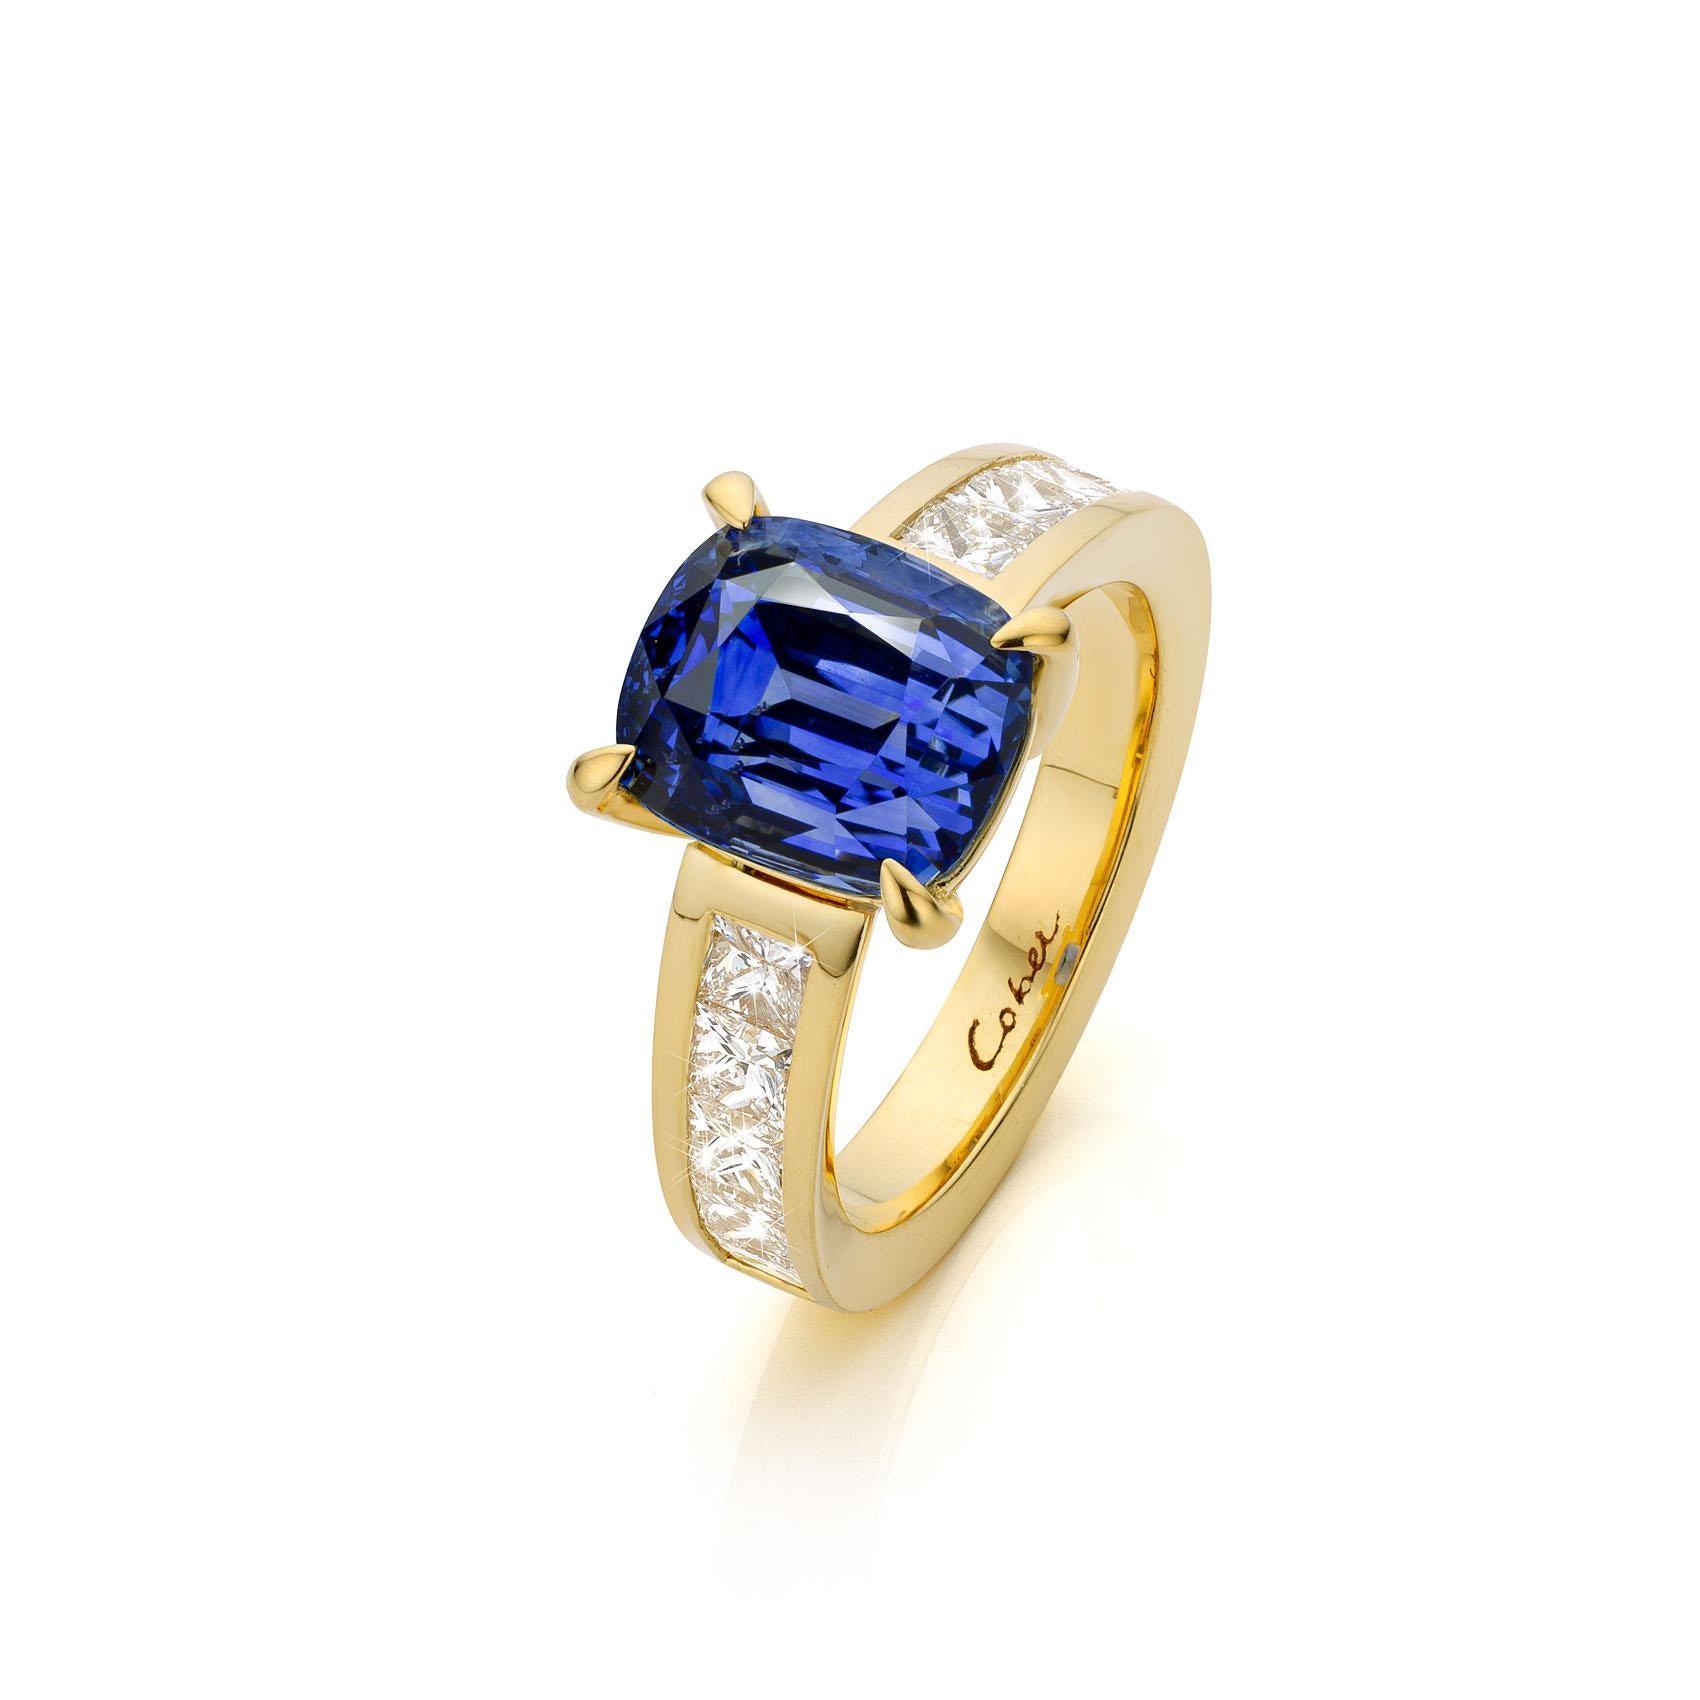 For Sale:  Cober “Beautiful blue” with 6.07 Carat Sapphire and Diamonds Yellow Gold Ring  3